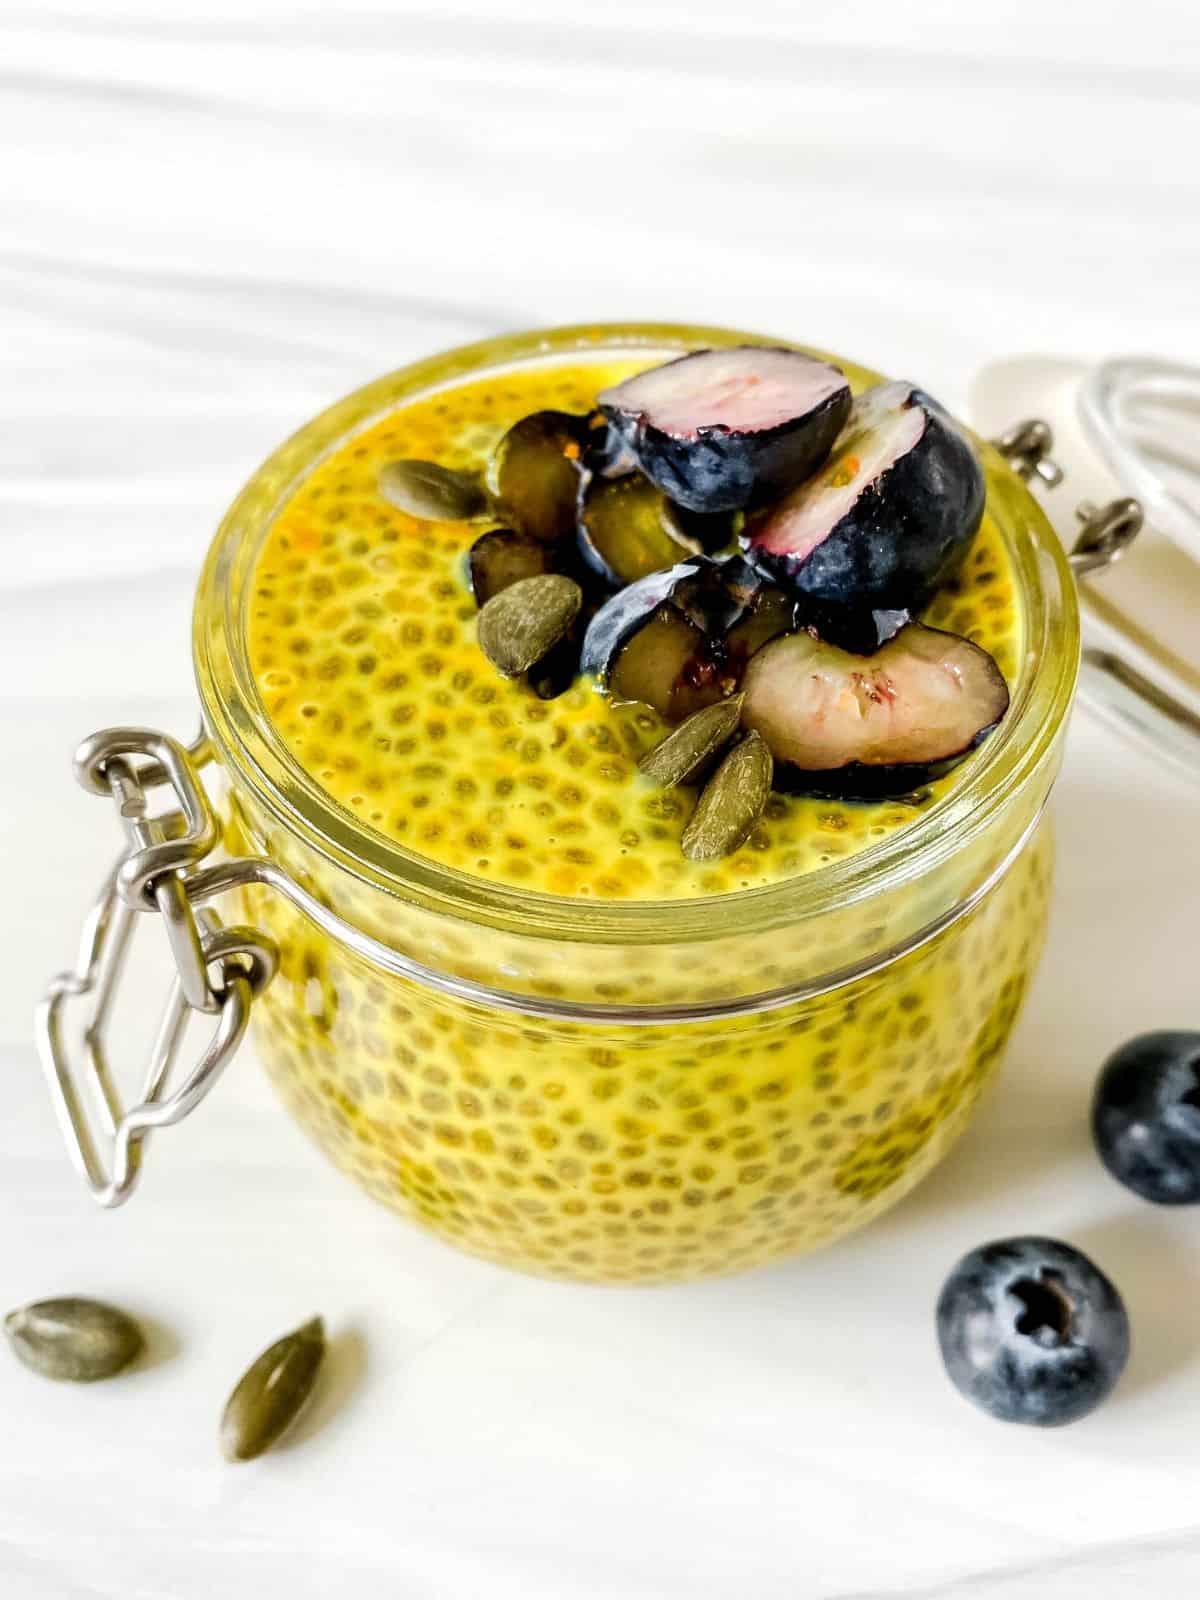 golden milk chia pudding in a glass jar with blueberries and pumpkin seeds next to it.